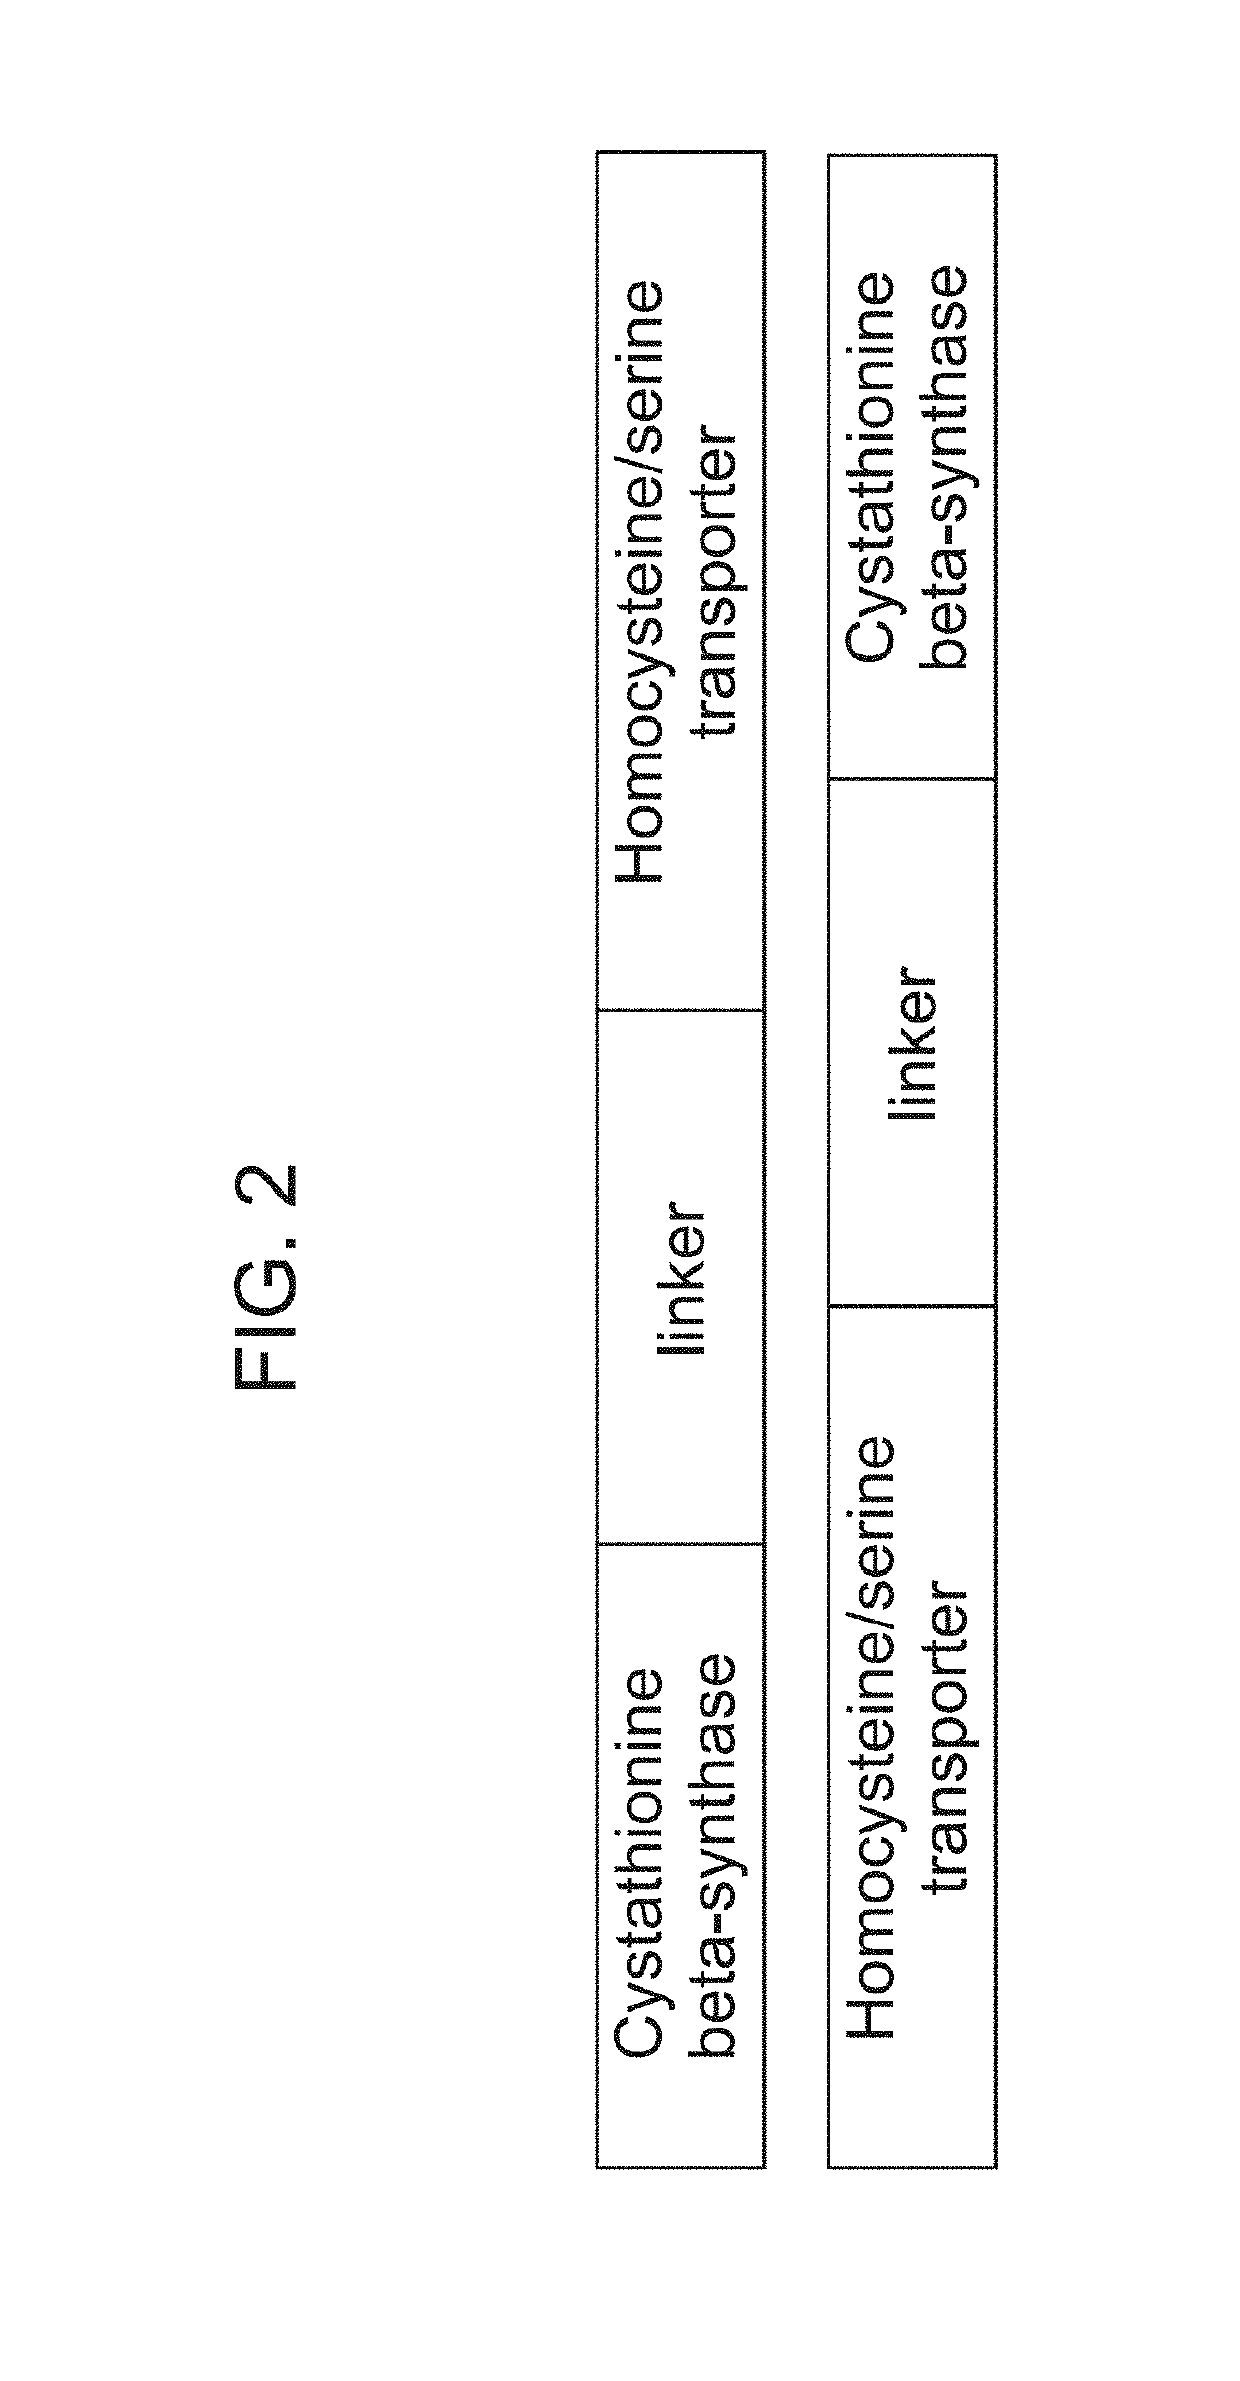 Therapeutic cell systems and methods for treating homocystinuria